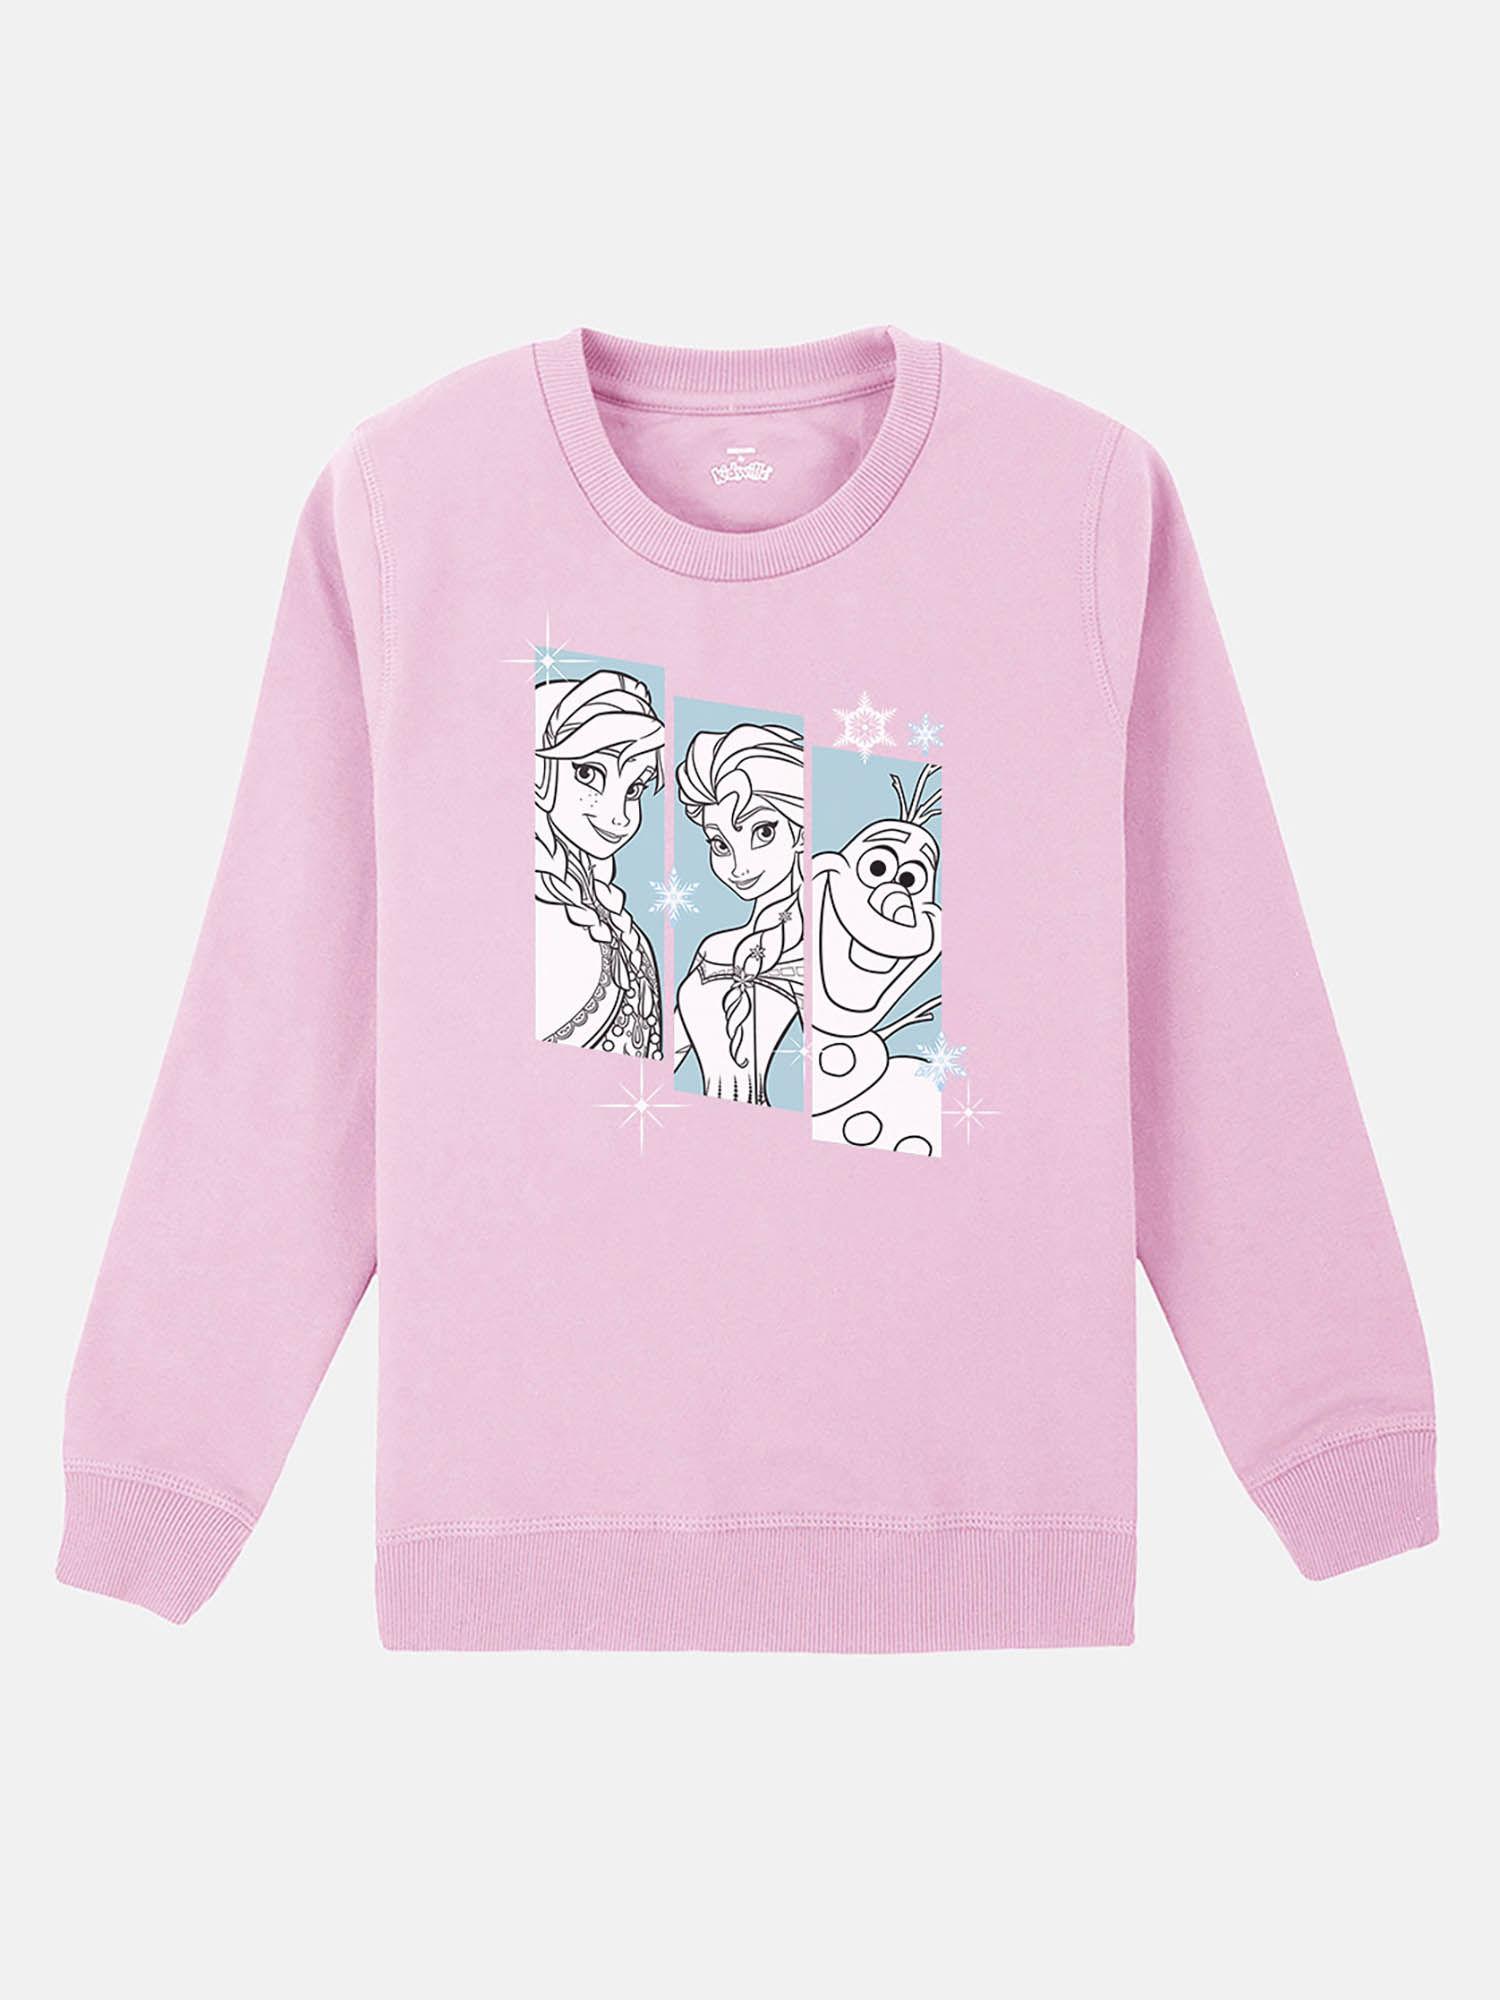 frozen printed pink full sleeve sweater